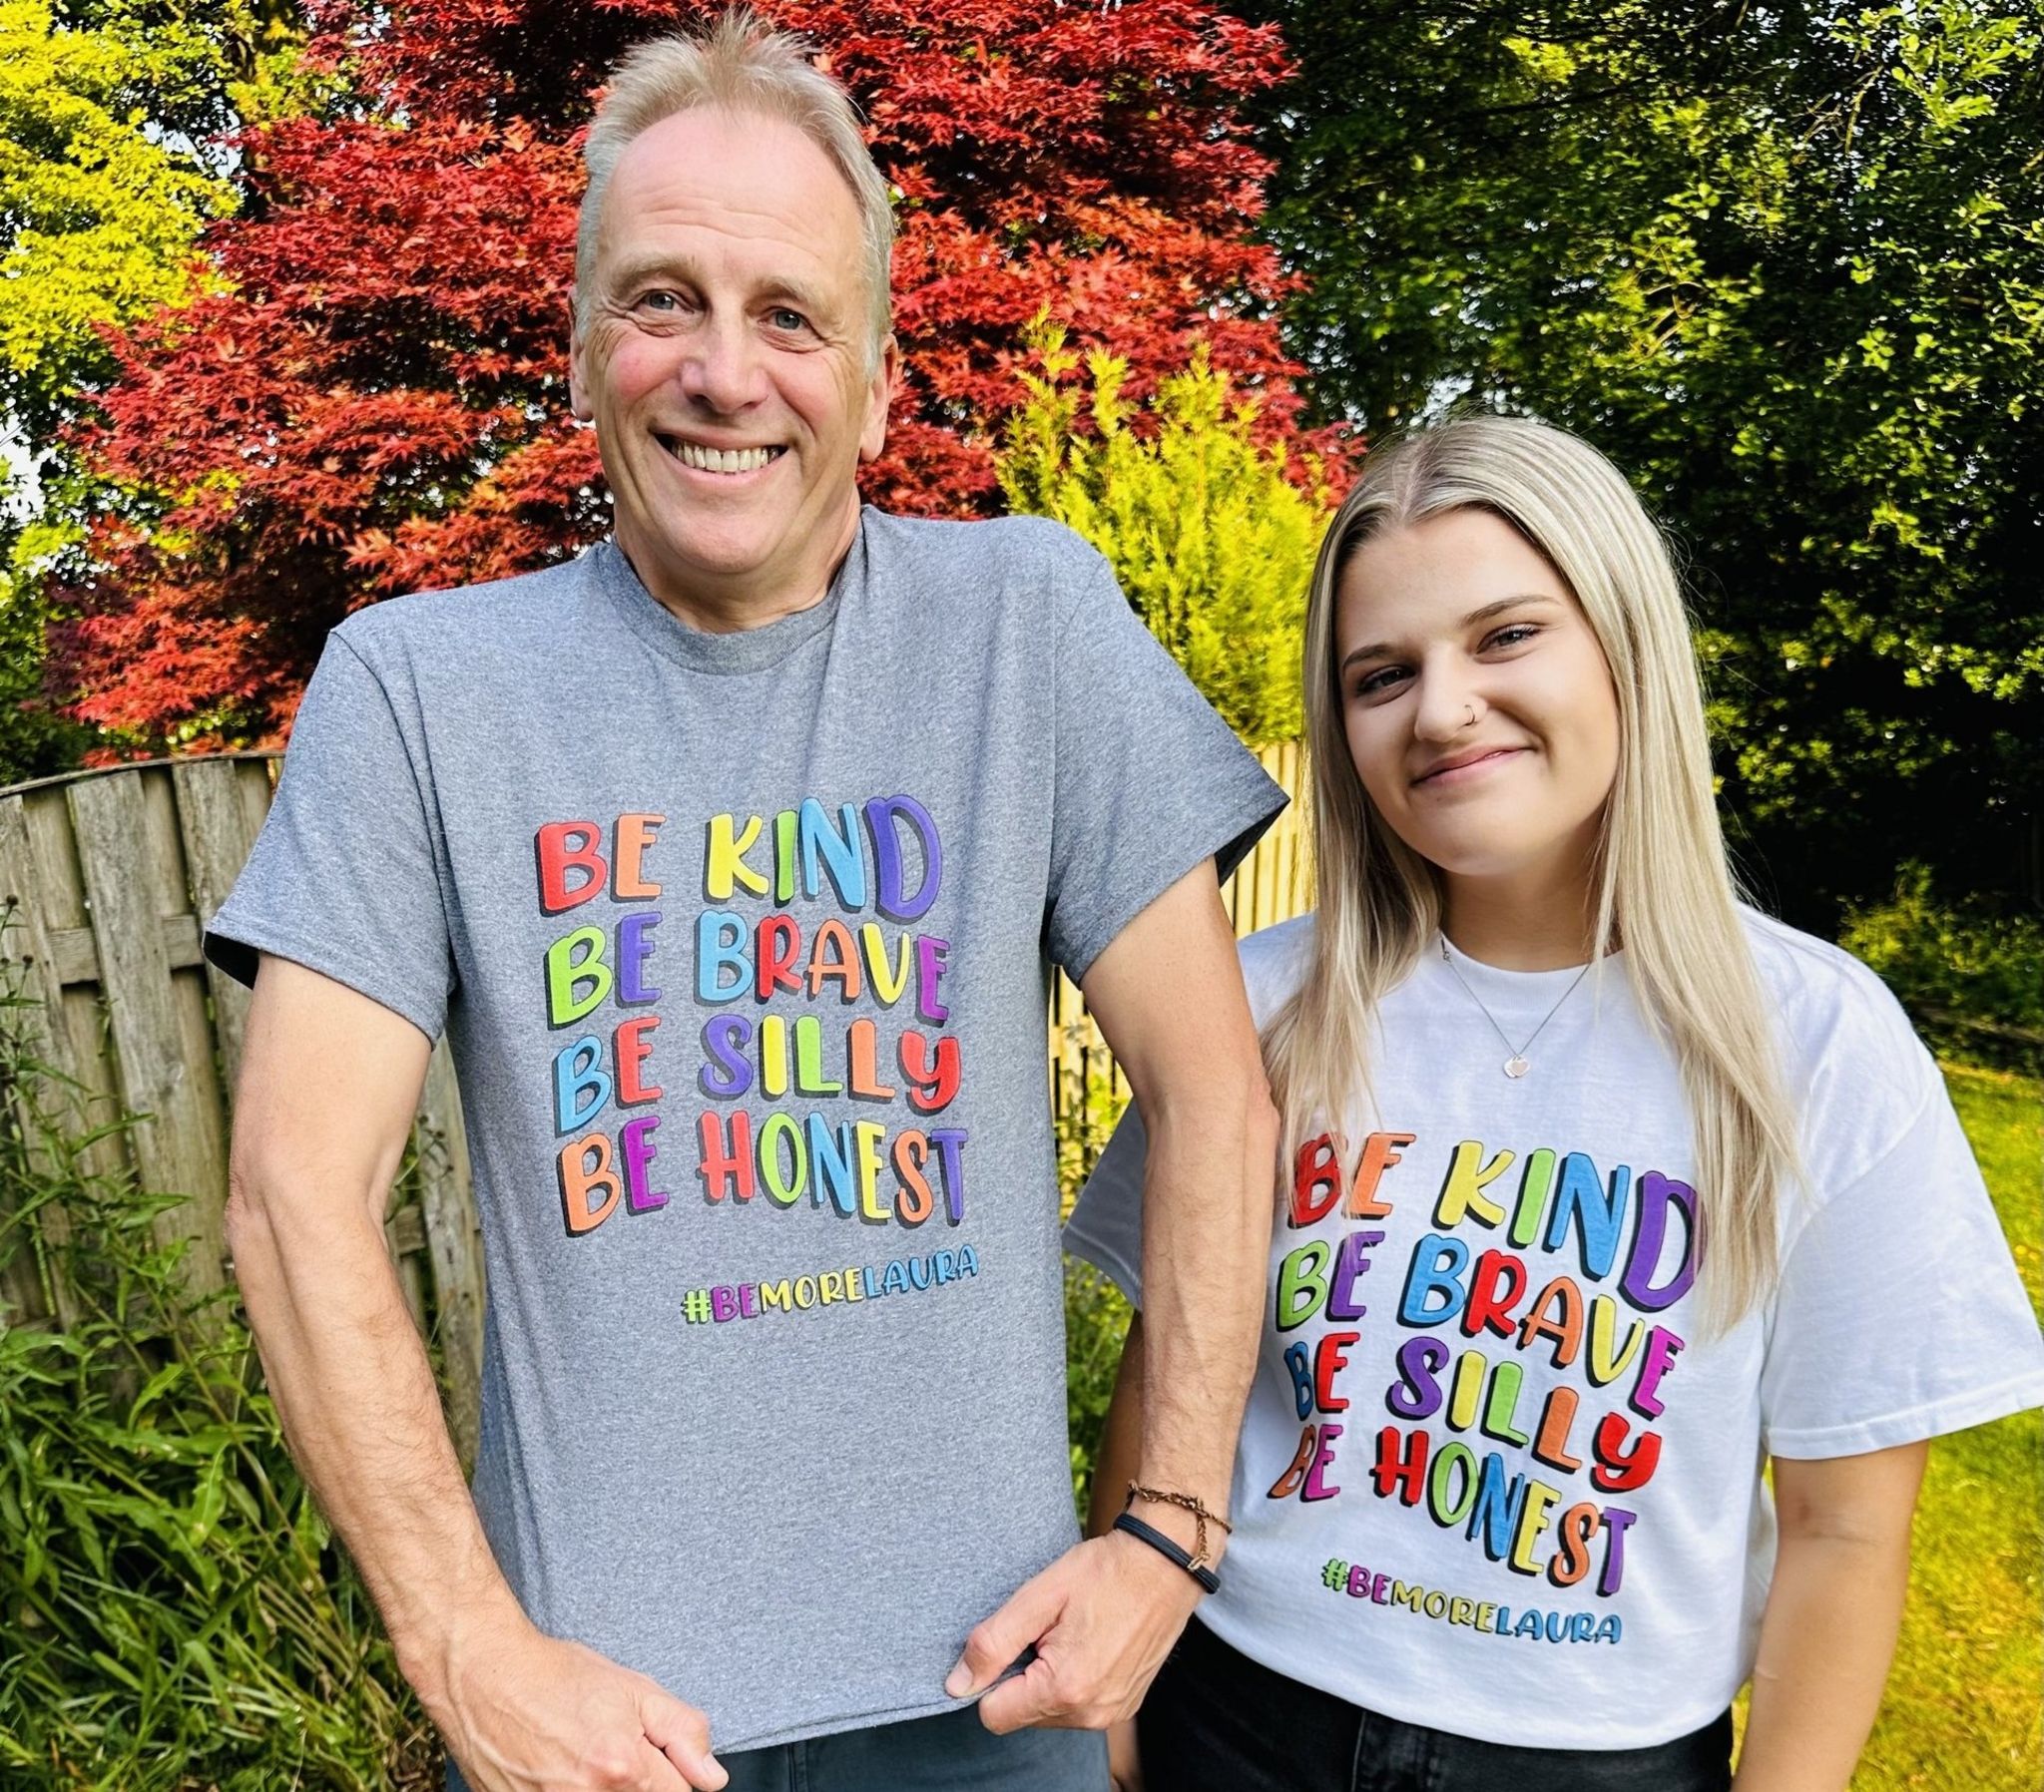 Gracie and her father wearing the T-shirts she designed